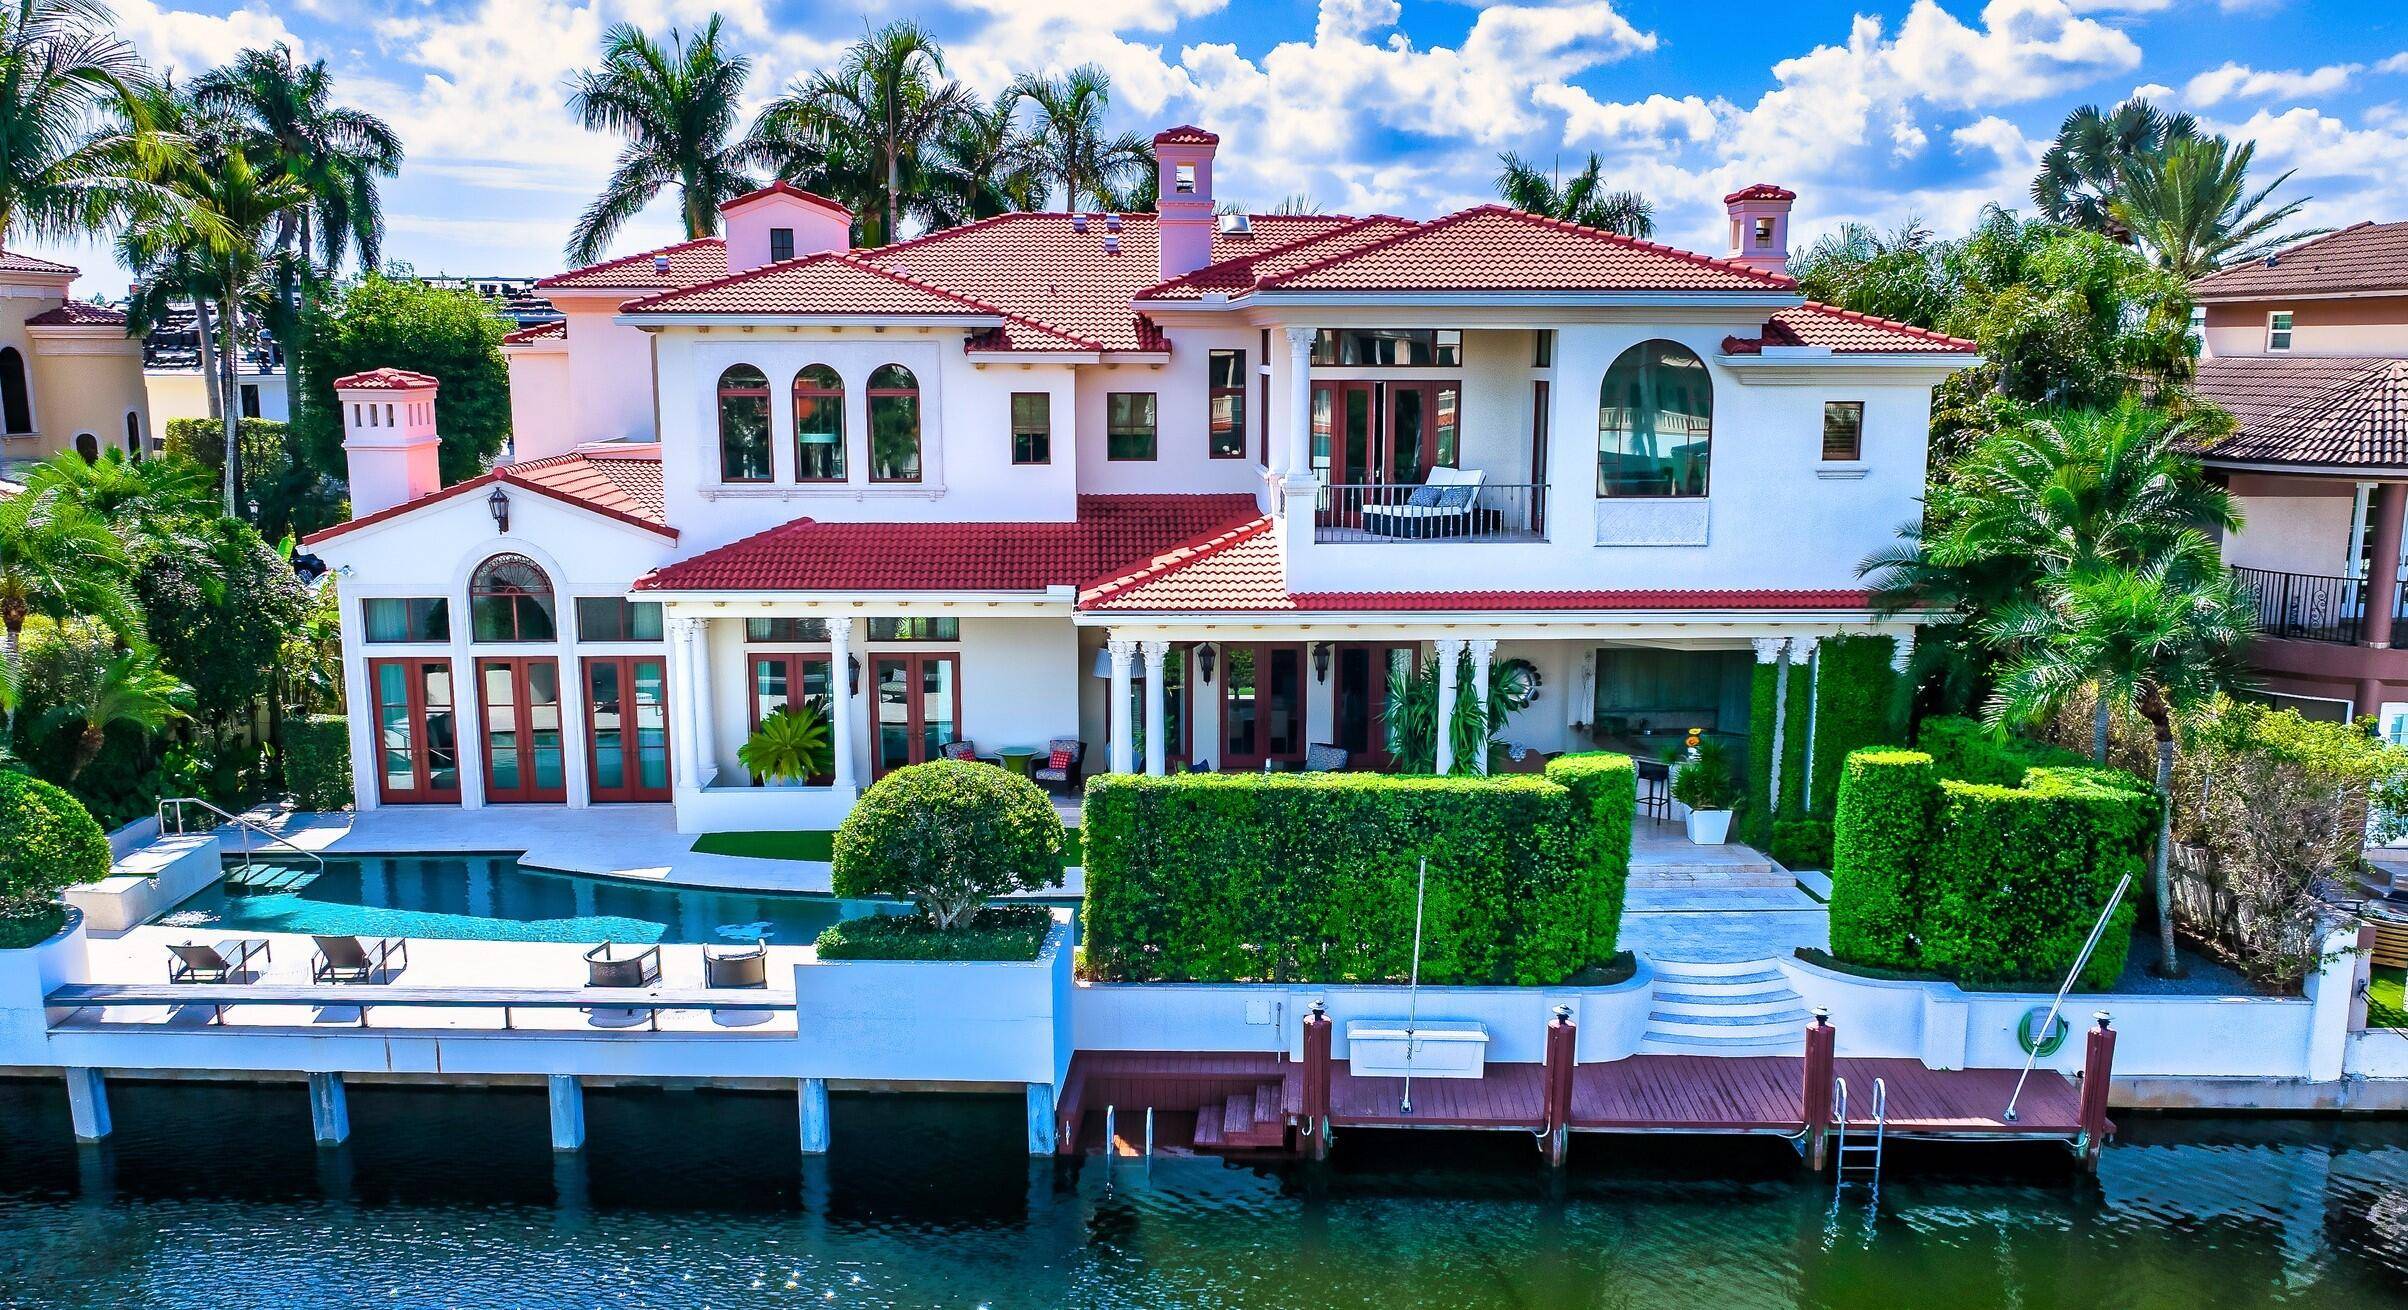 Chic Montecito style meets this Sanctuary deepwater estate sited on 116 feet of waterfrontage originally built by Palm Beach builder Addison Development and interiors by Marc Michaels.